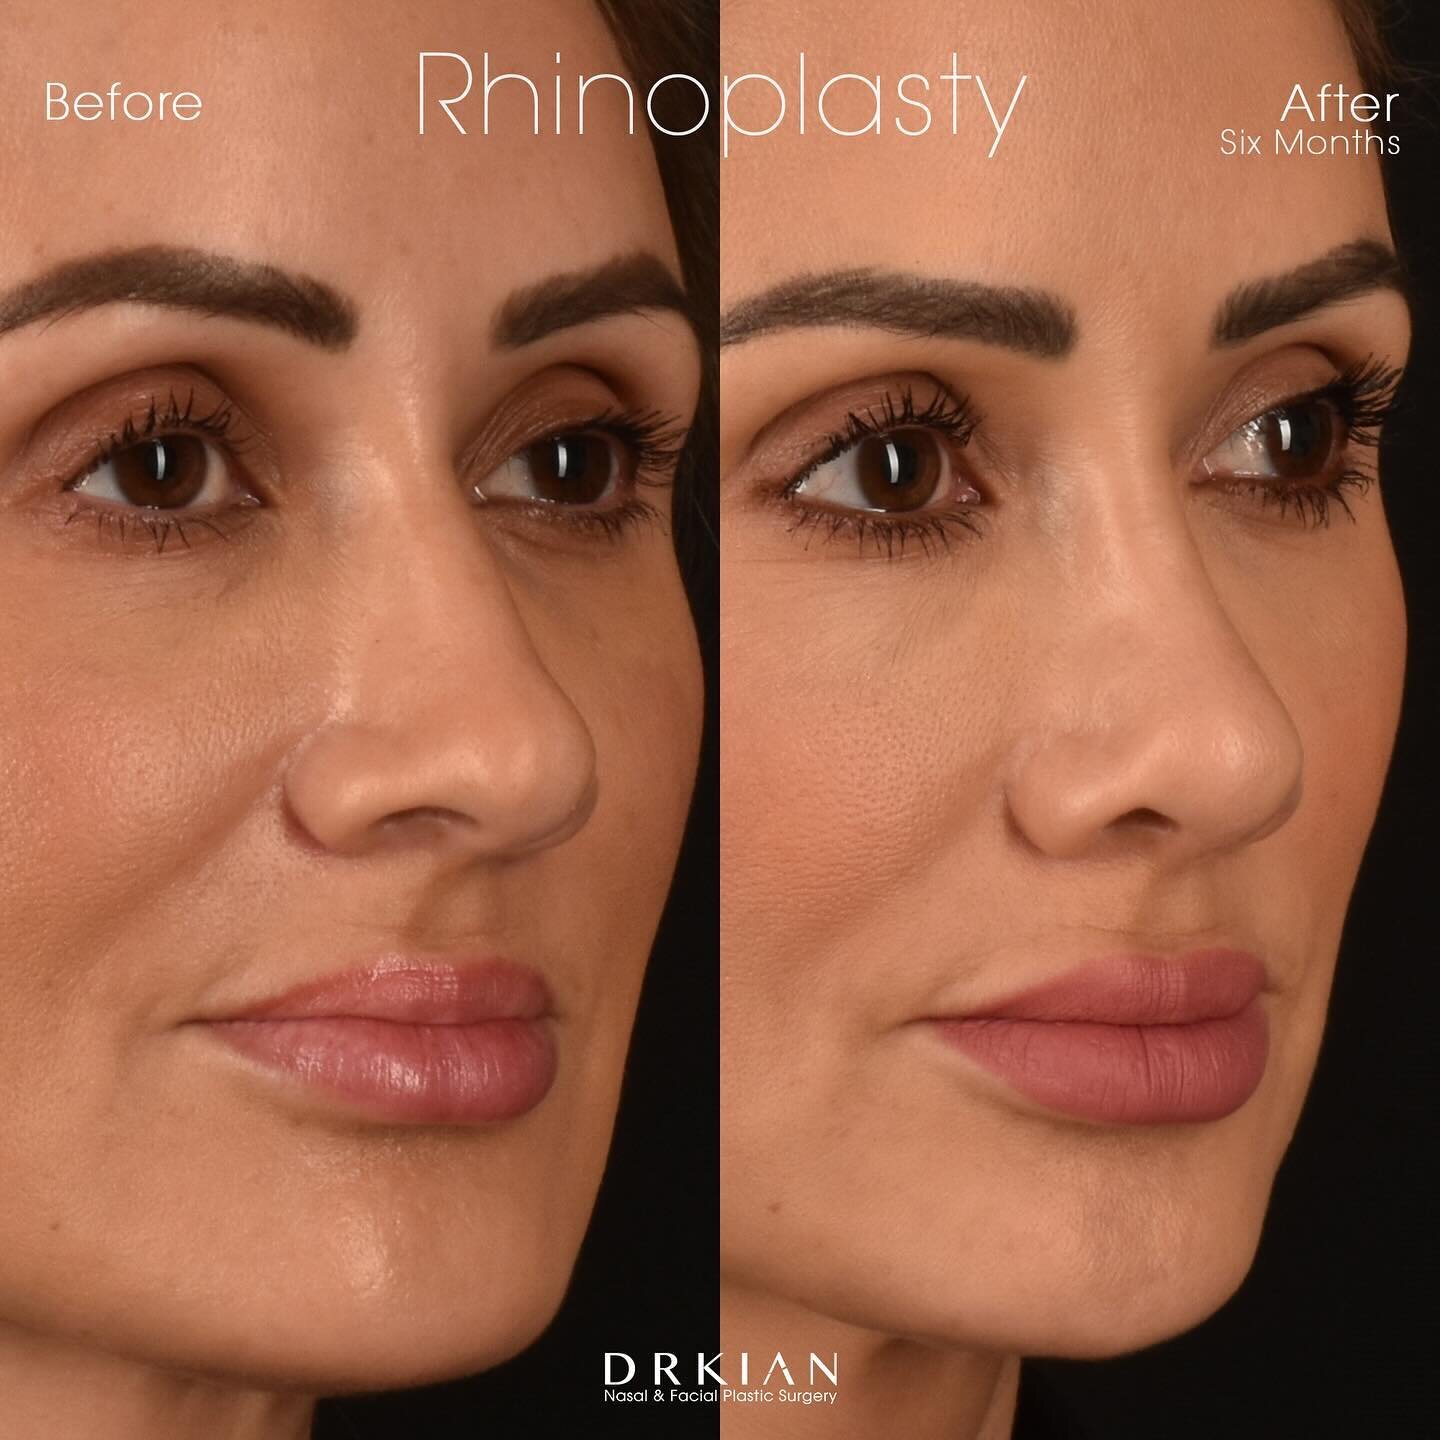 As an aesthetic practitioner, Melissa was well aware of the transformative impact such a procedure could have on an individual&rsquo;s confidence and overall quality of life. She decided to undergo cosmetic rhinoplasty procedure to address these issu